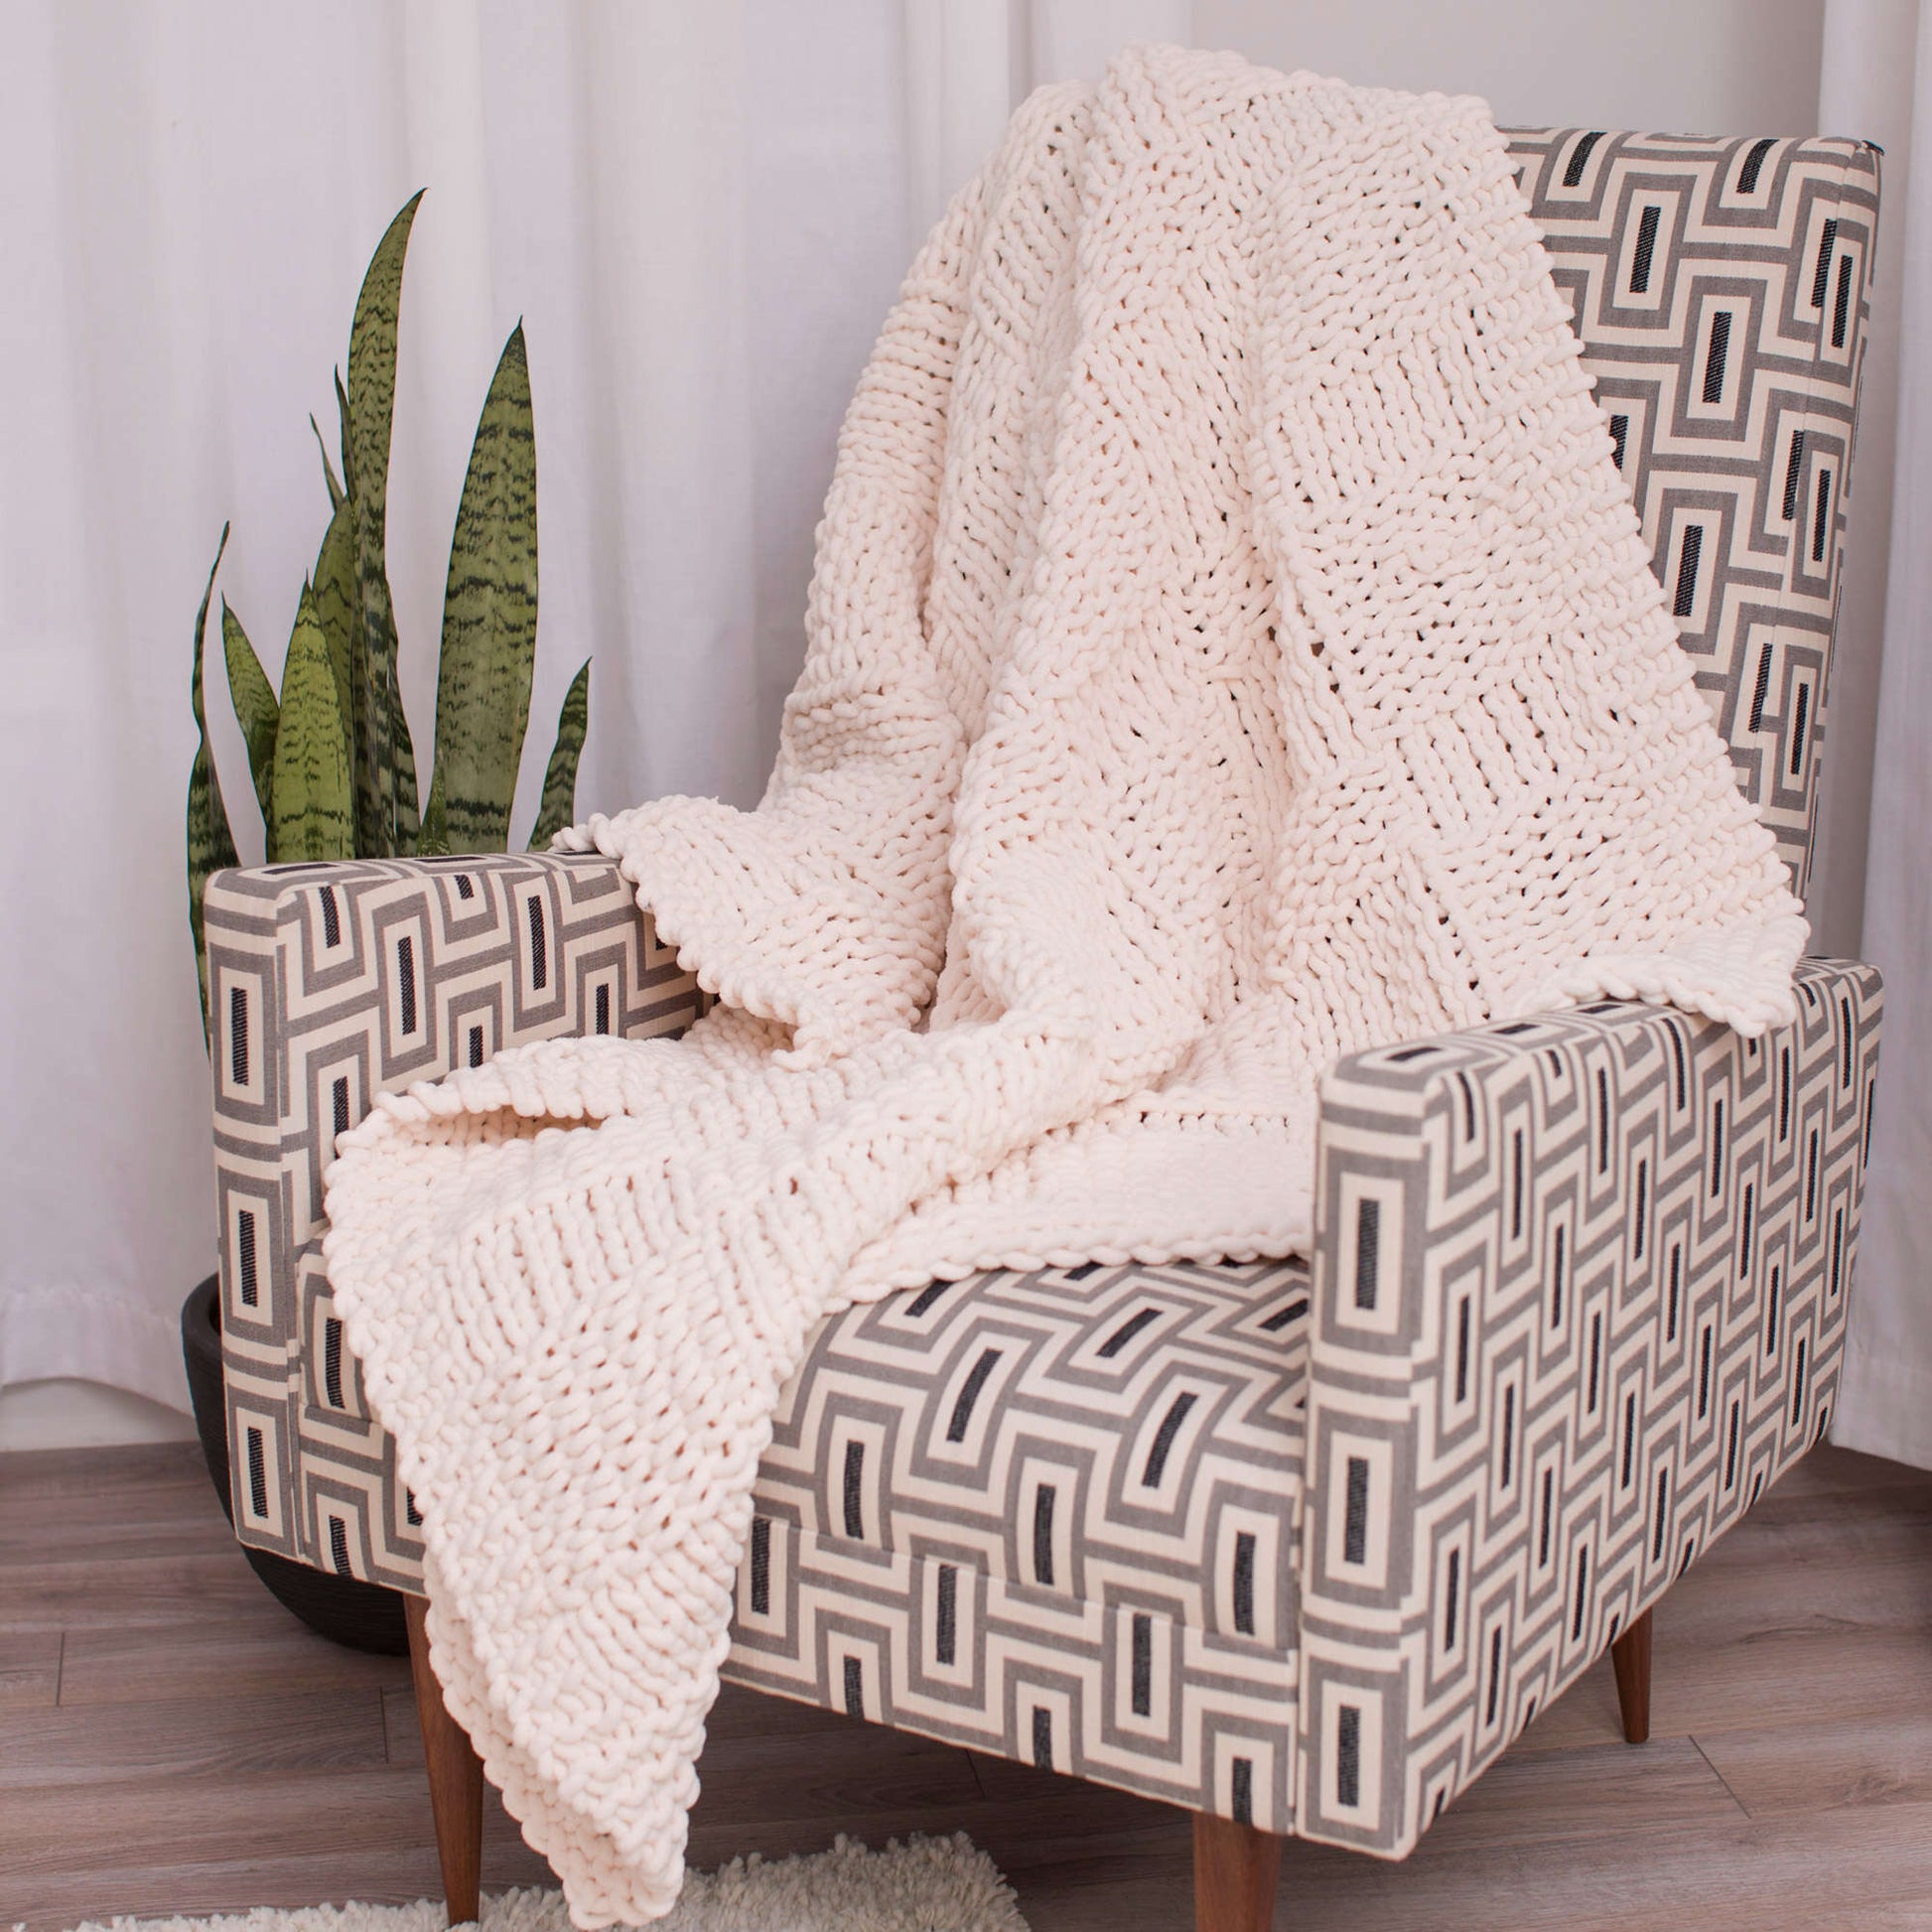 Free Red Heart Knit Heavenly Throw Pattern